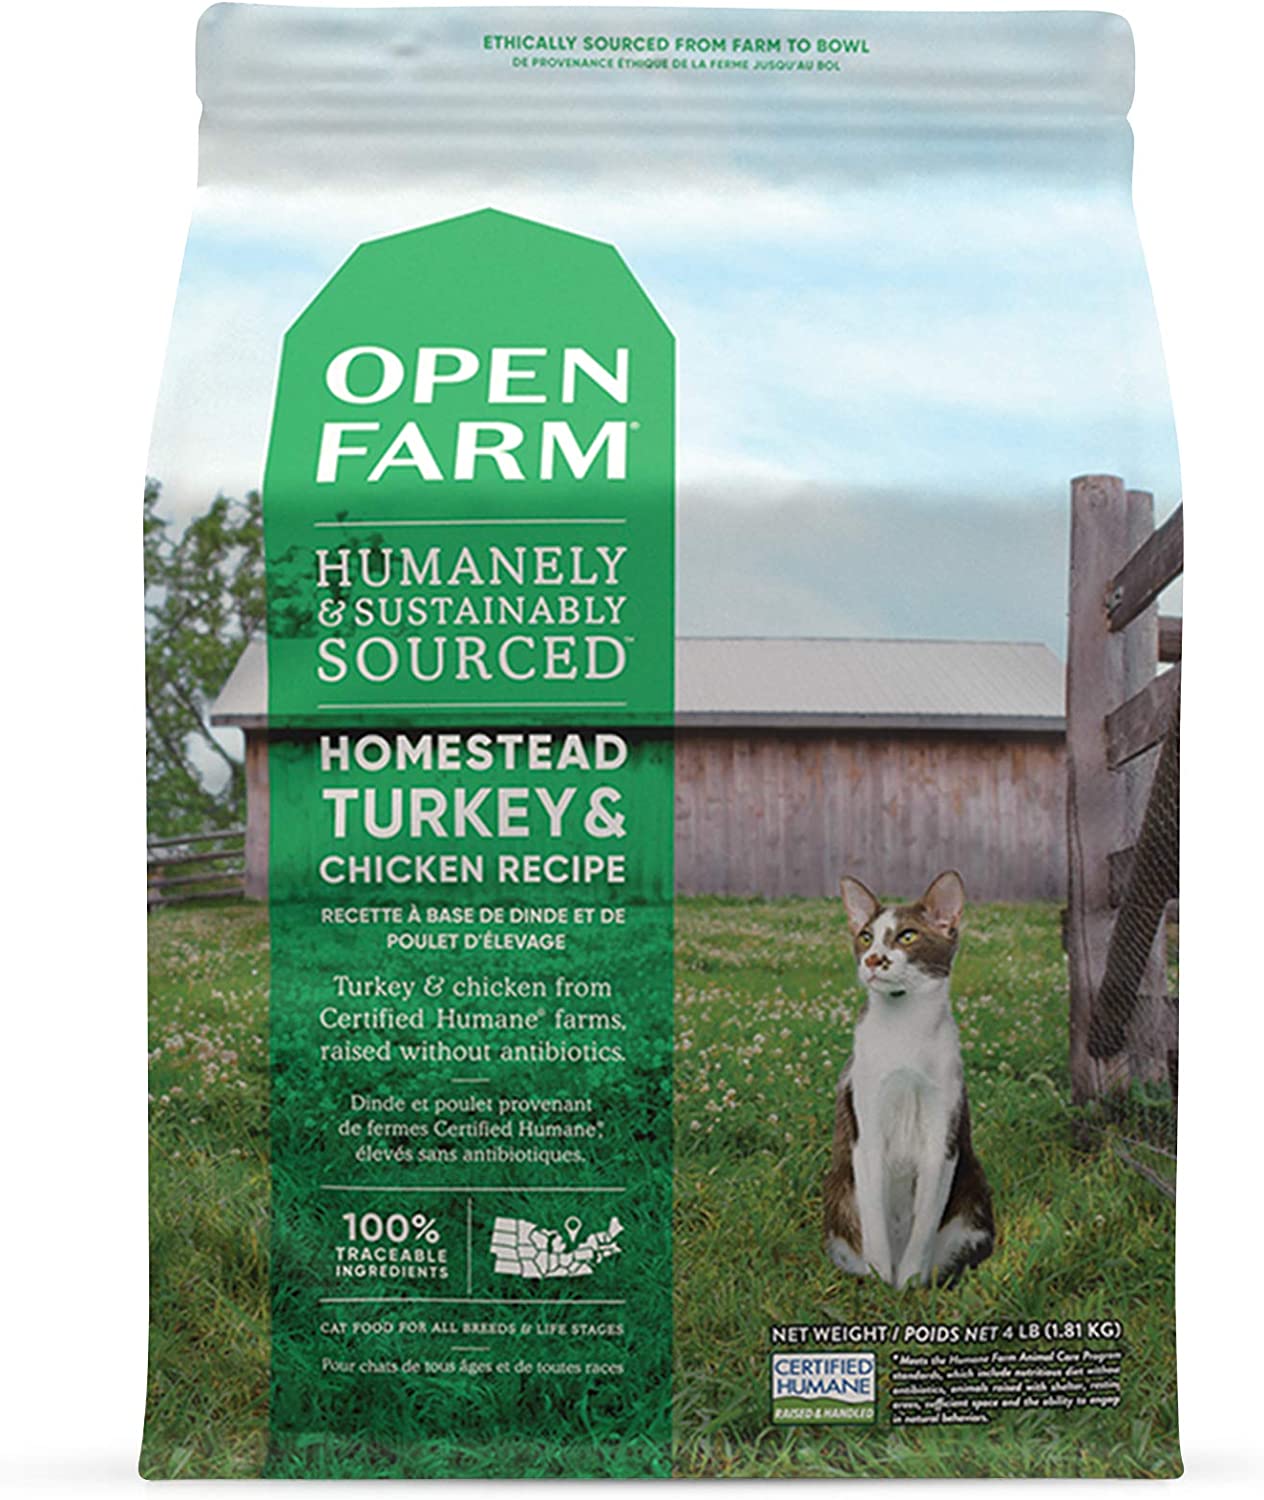 Open Farm humanely sourced cat food